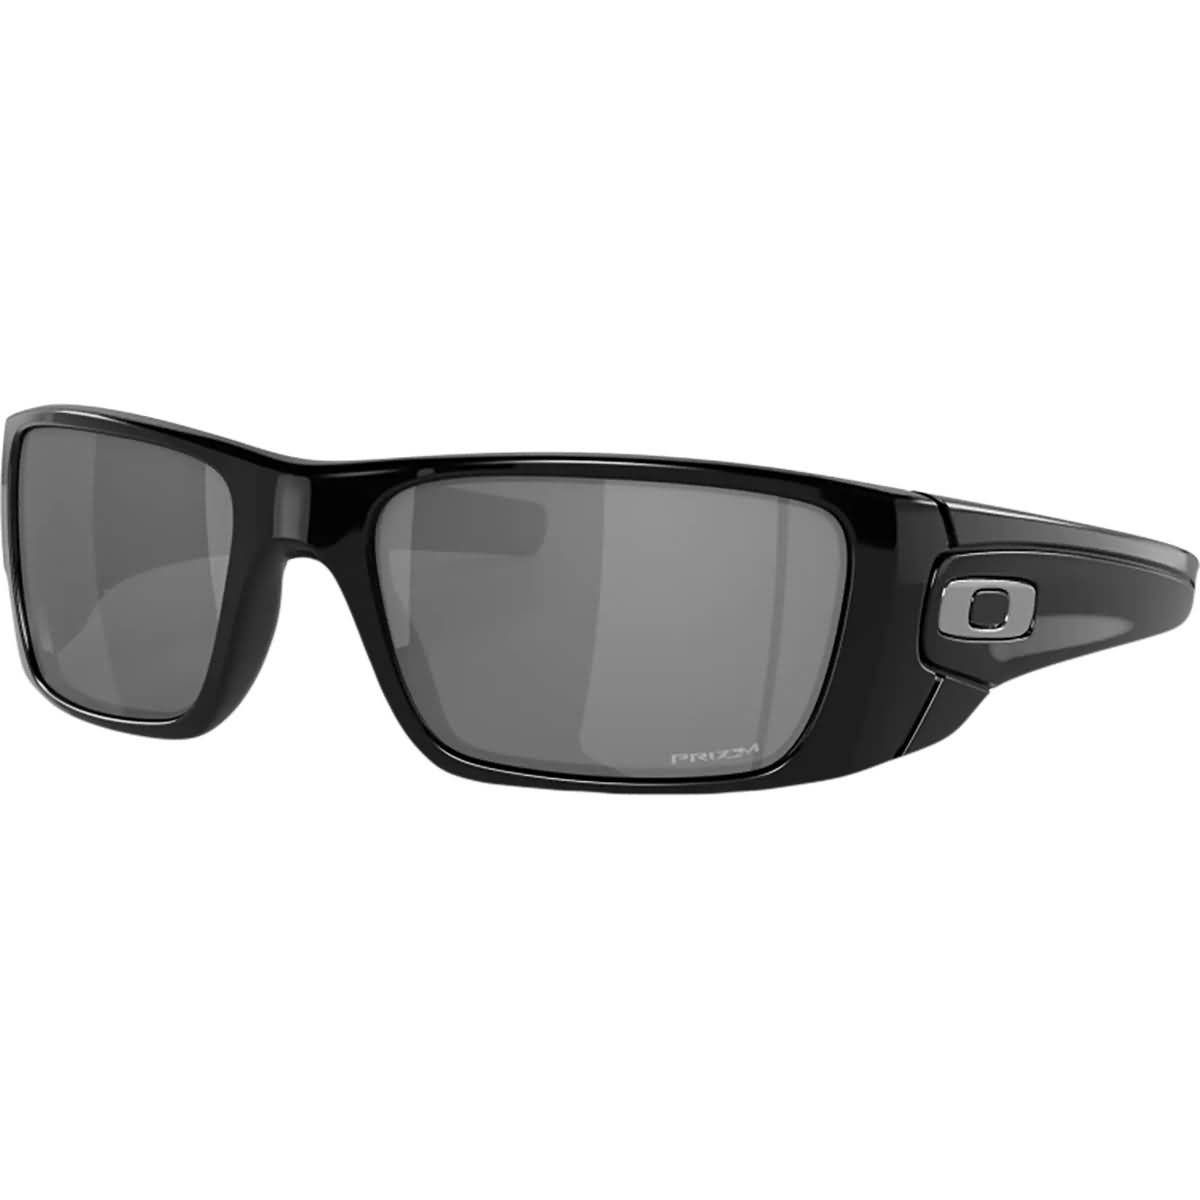 Oakley Fuel Cell Prizm Men's Lifestyle Sunglasses-OO9096